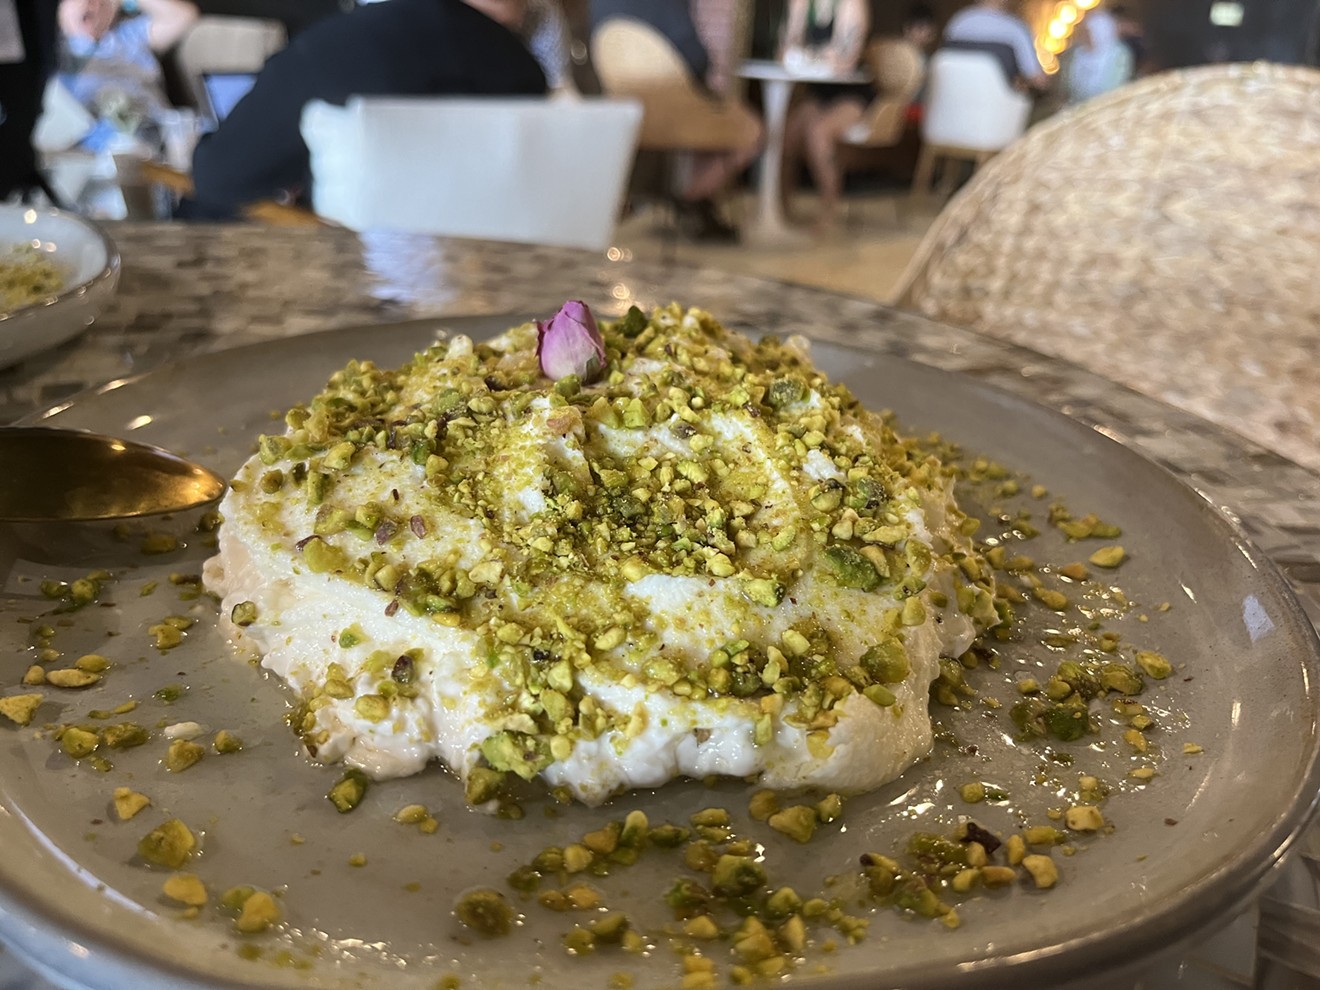 The house-special, Madluka, is a typical Syrian sweet that comes with a base of semolina pudding garnished with cream and pistachios.